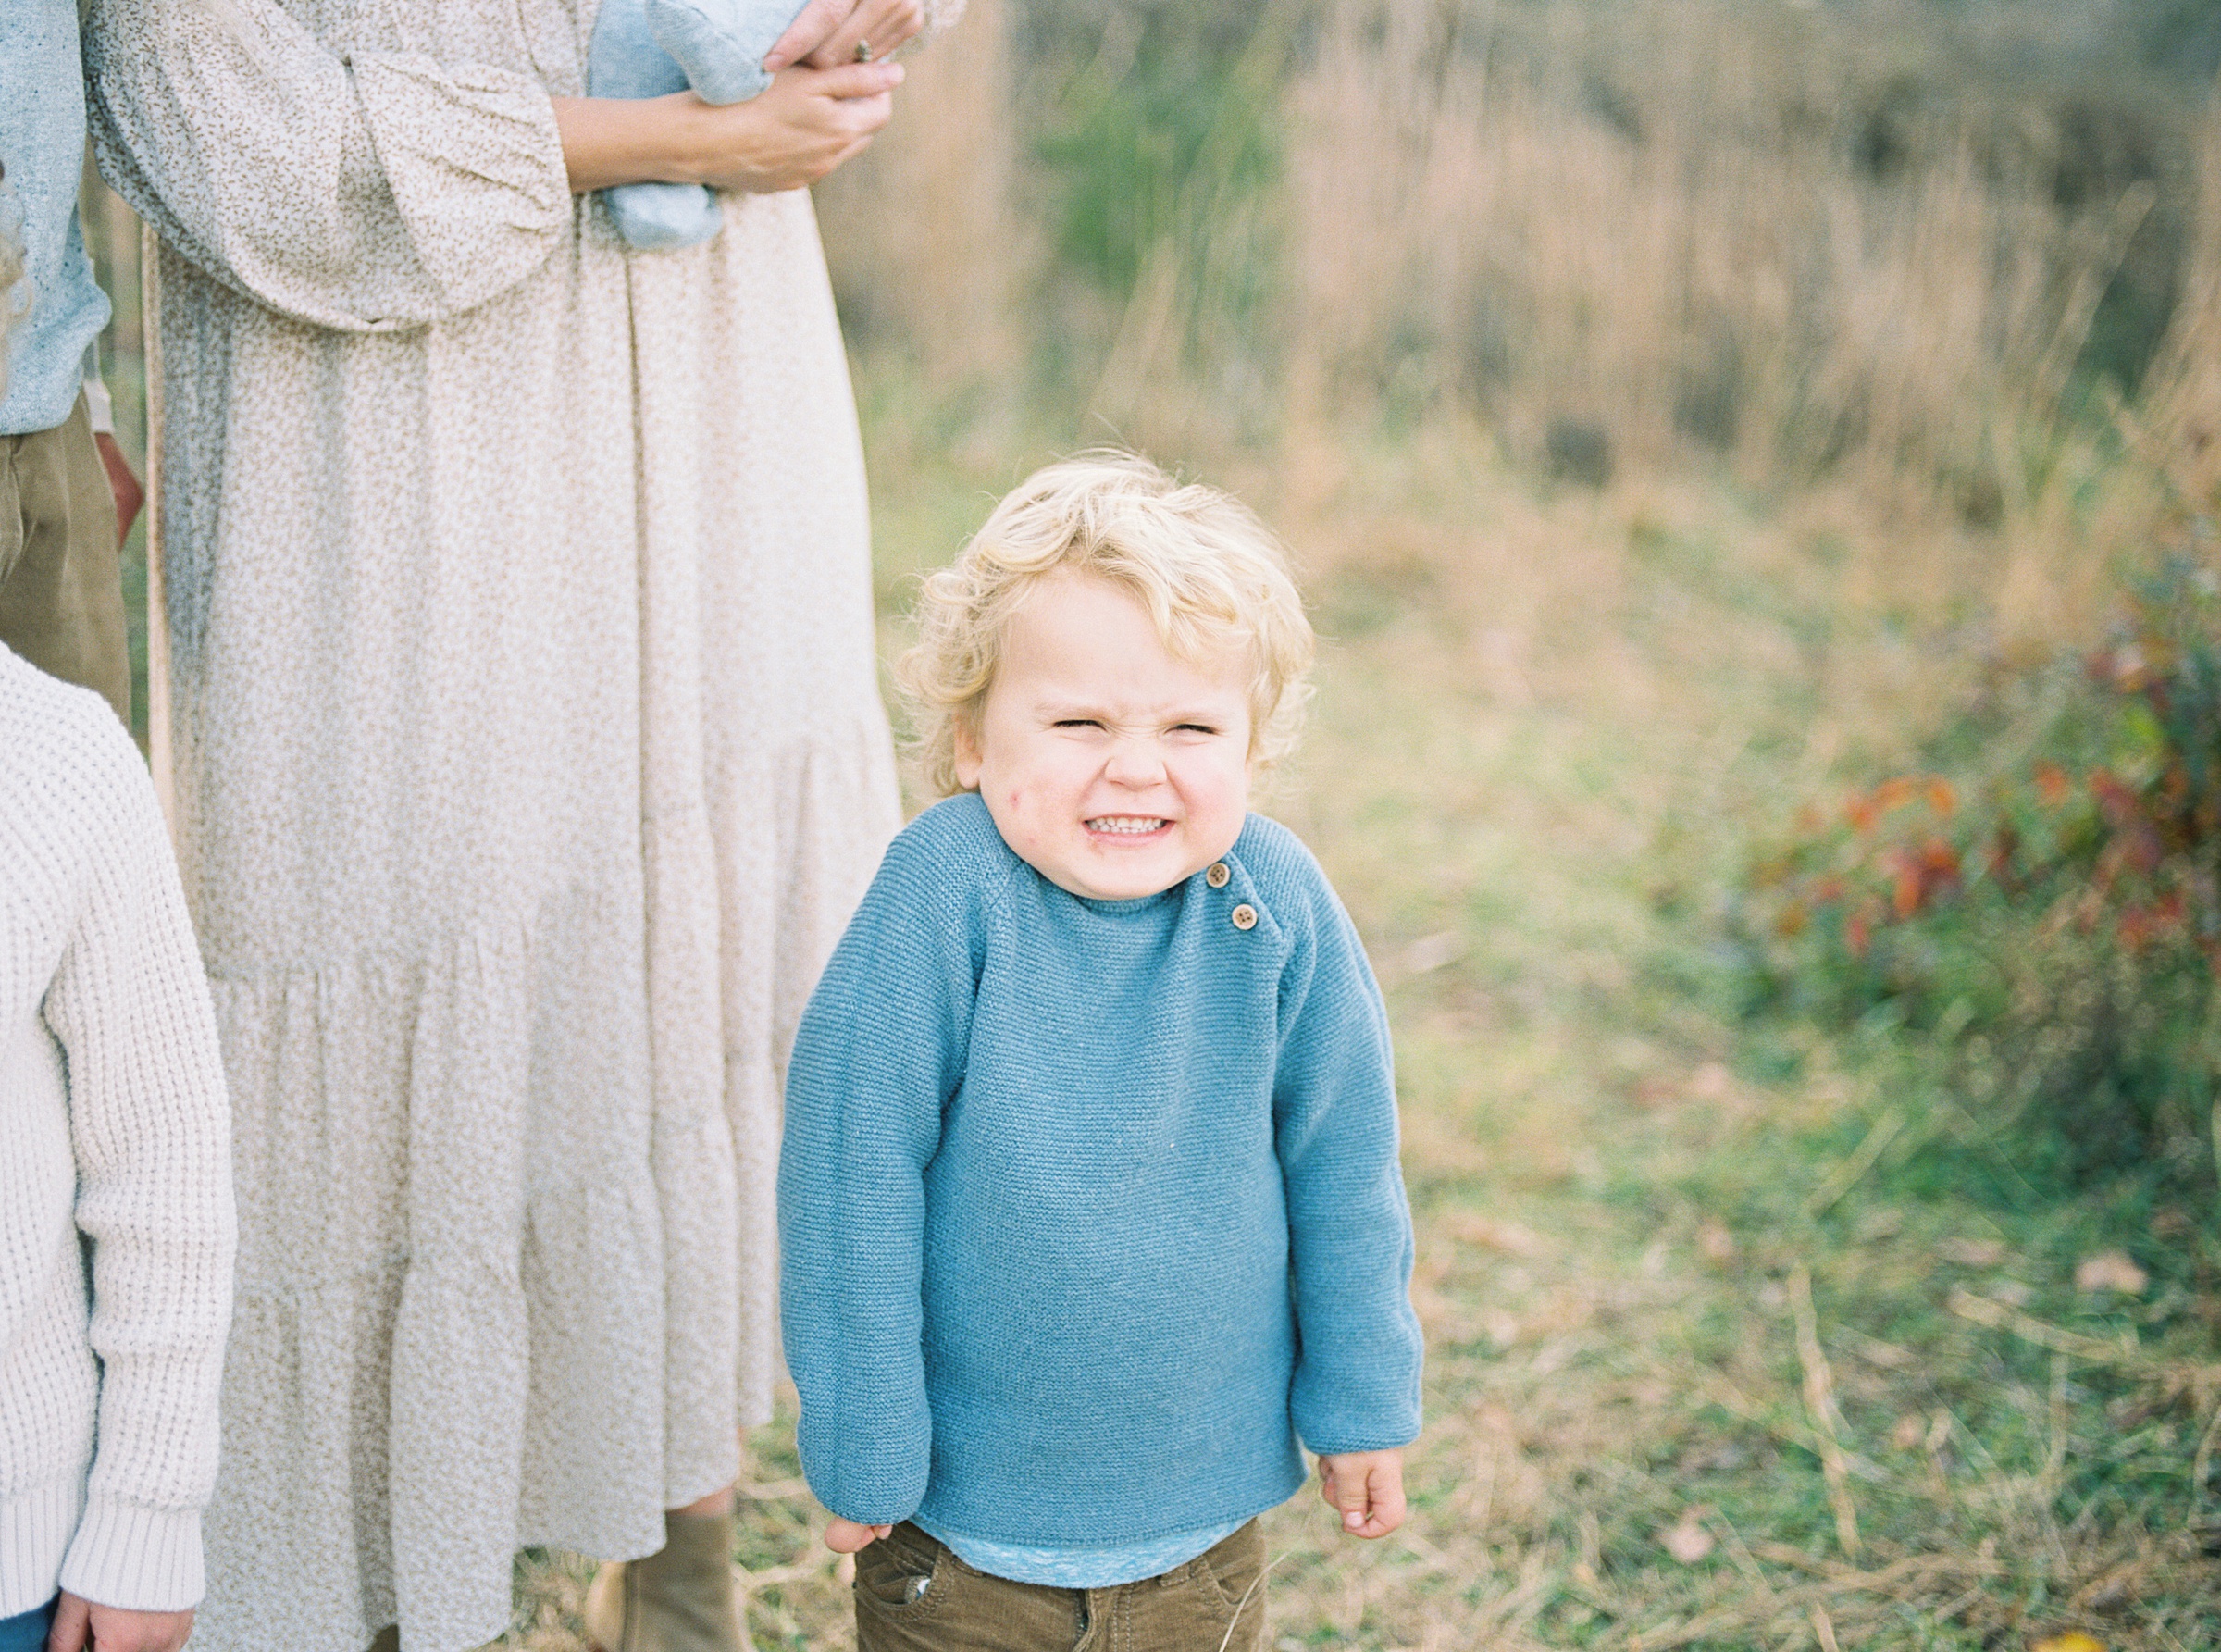 little boy in teal sweater smiles adorably for camera